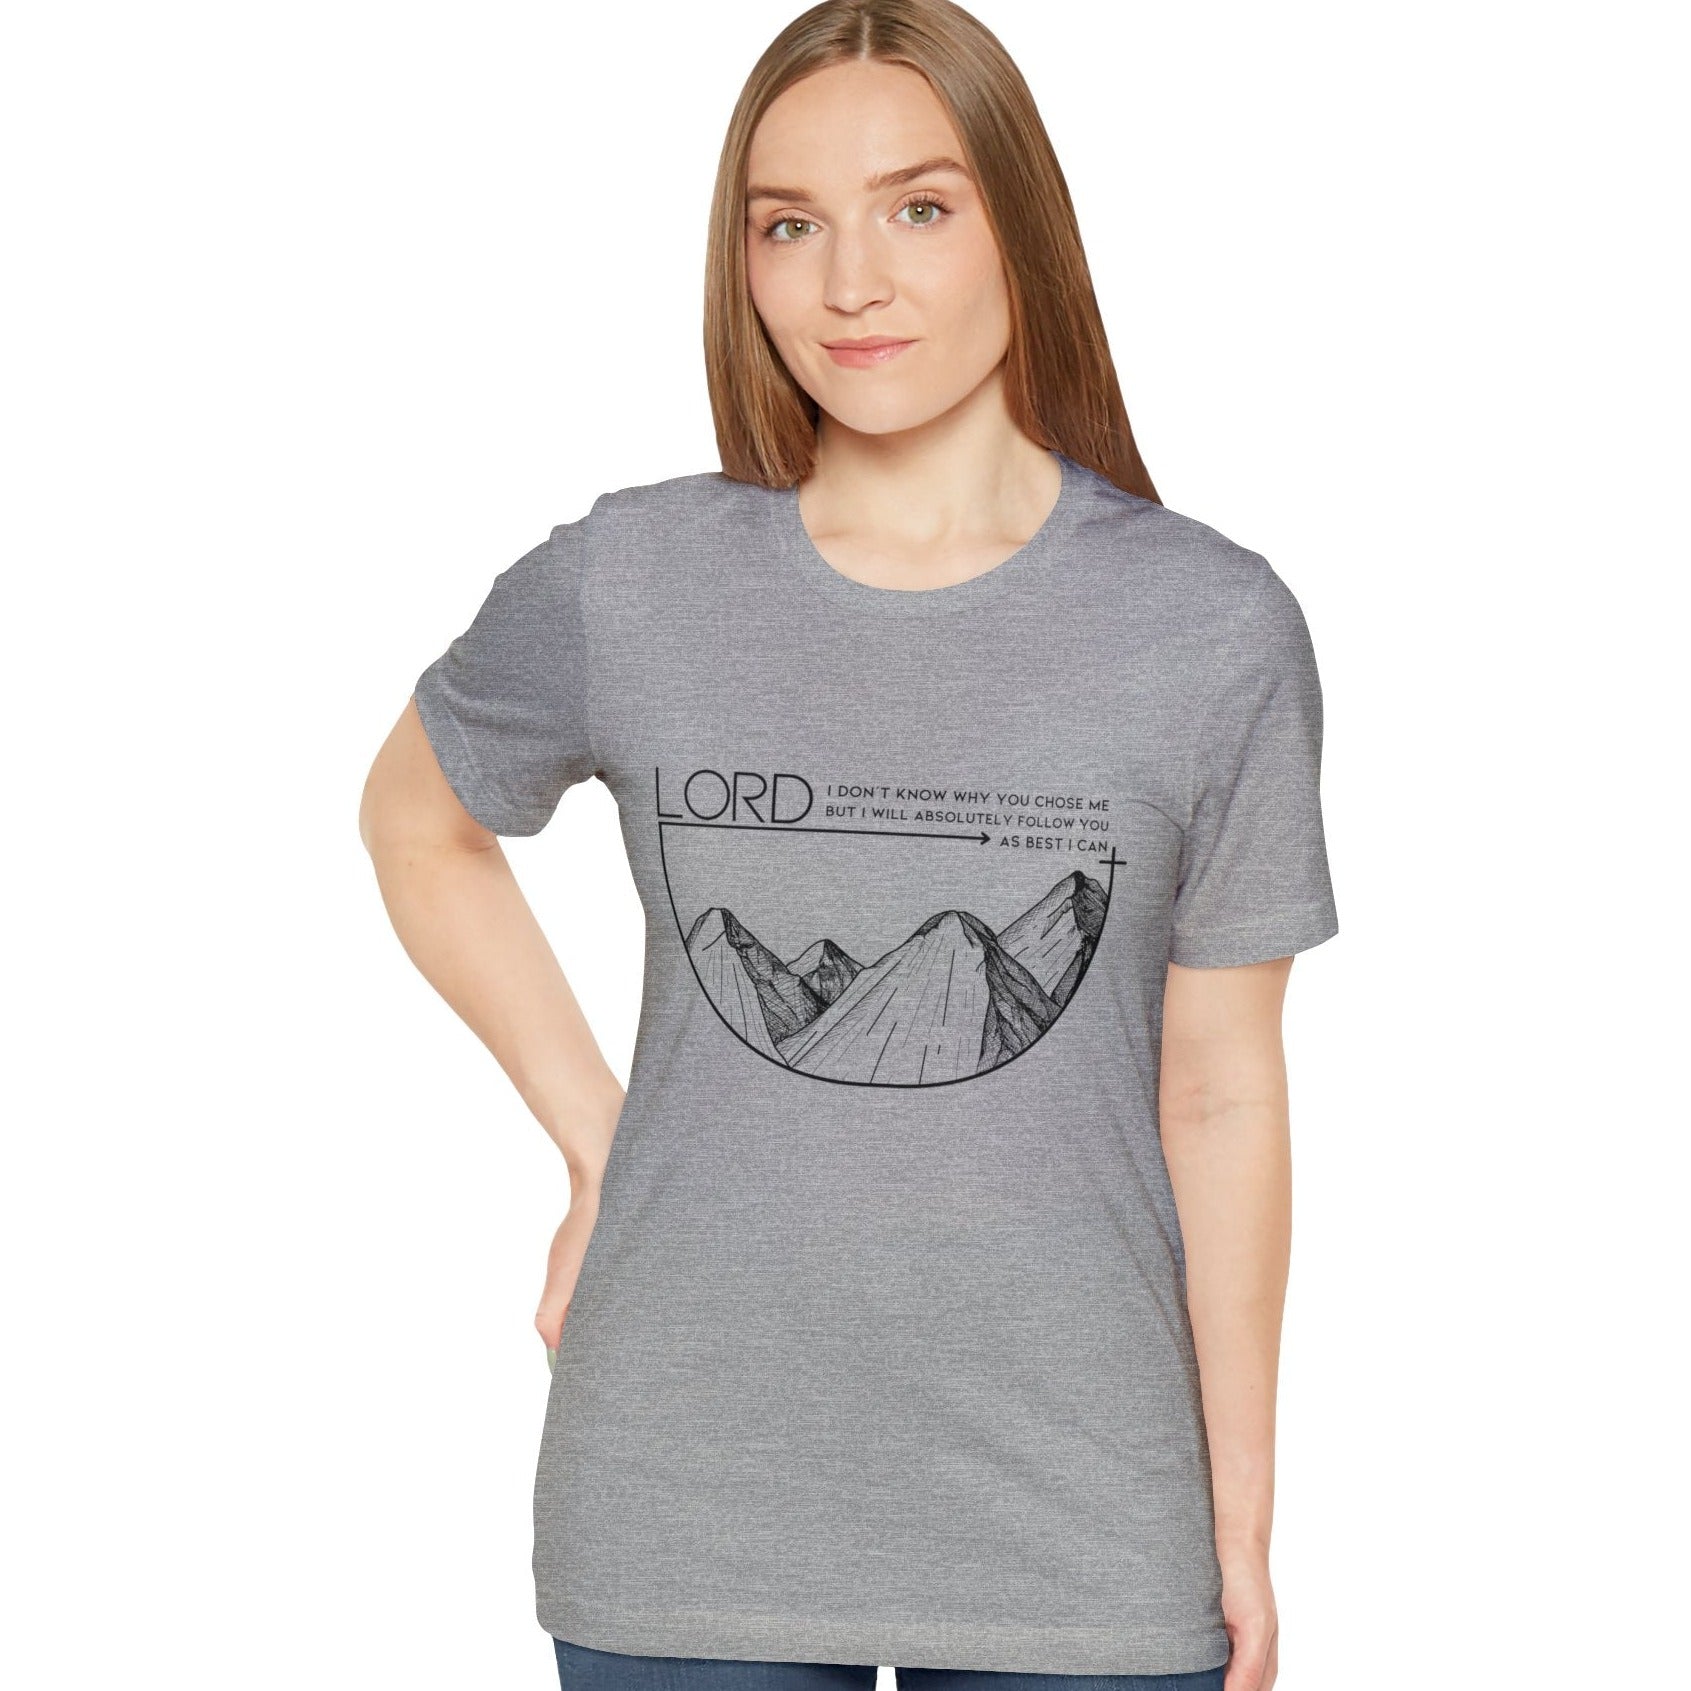 Follow the Lord, Express Delivery, Christian T-shirt for Men and Women athletic heather gray